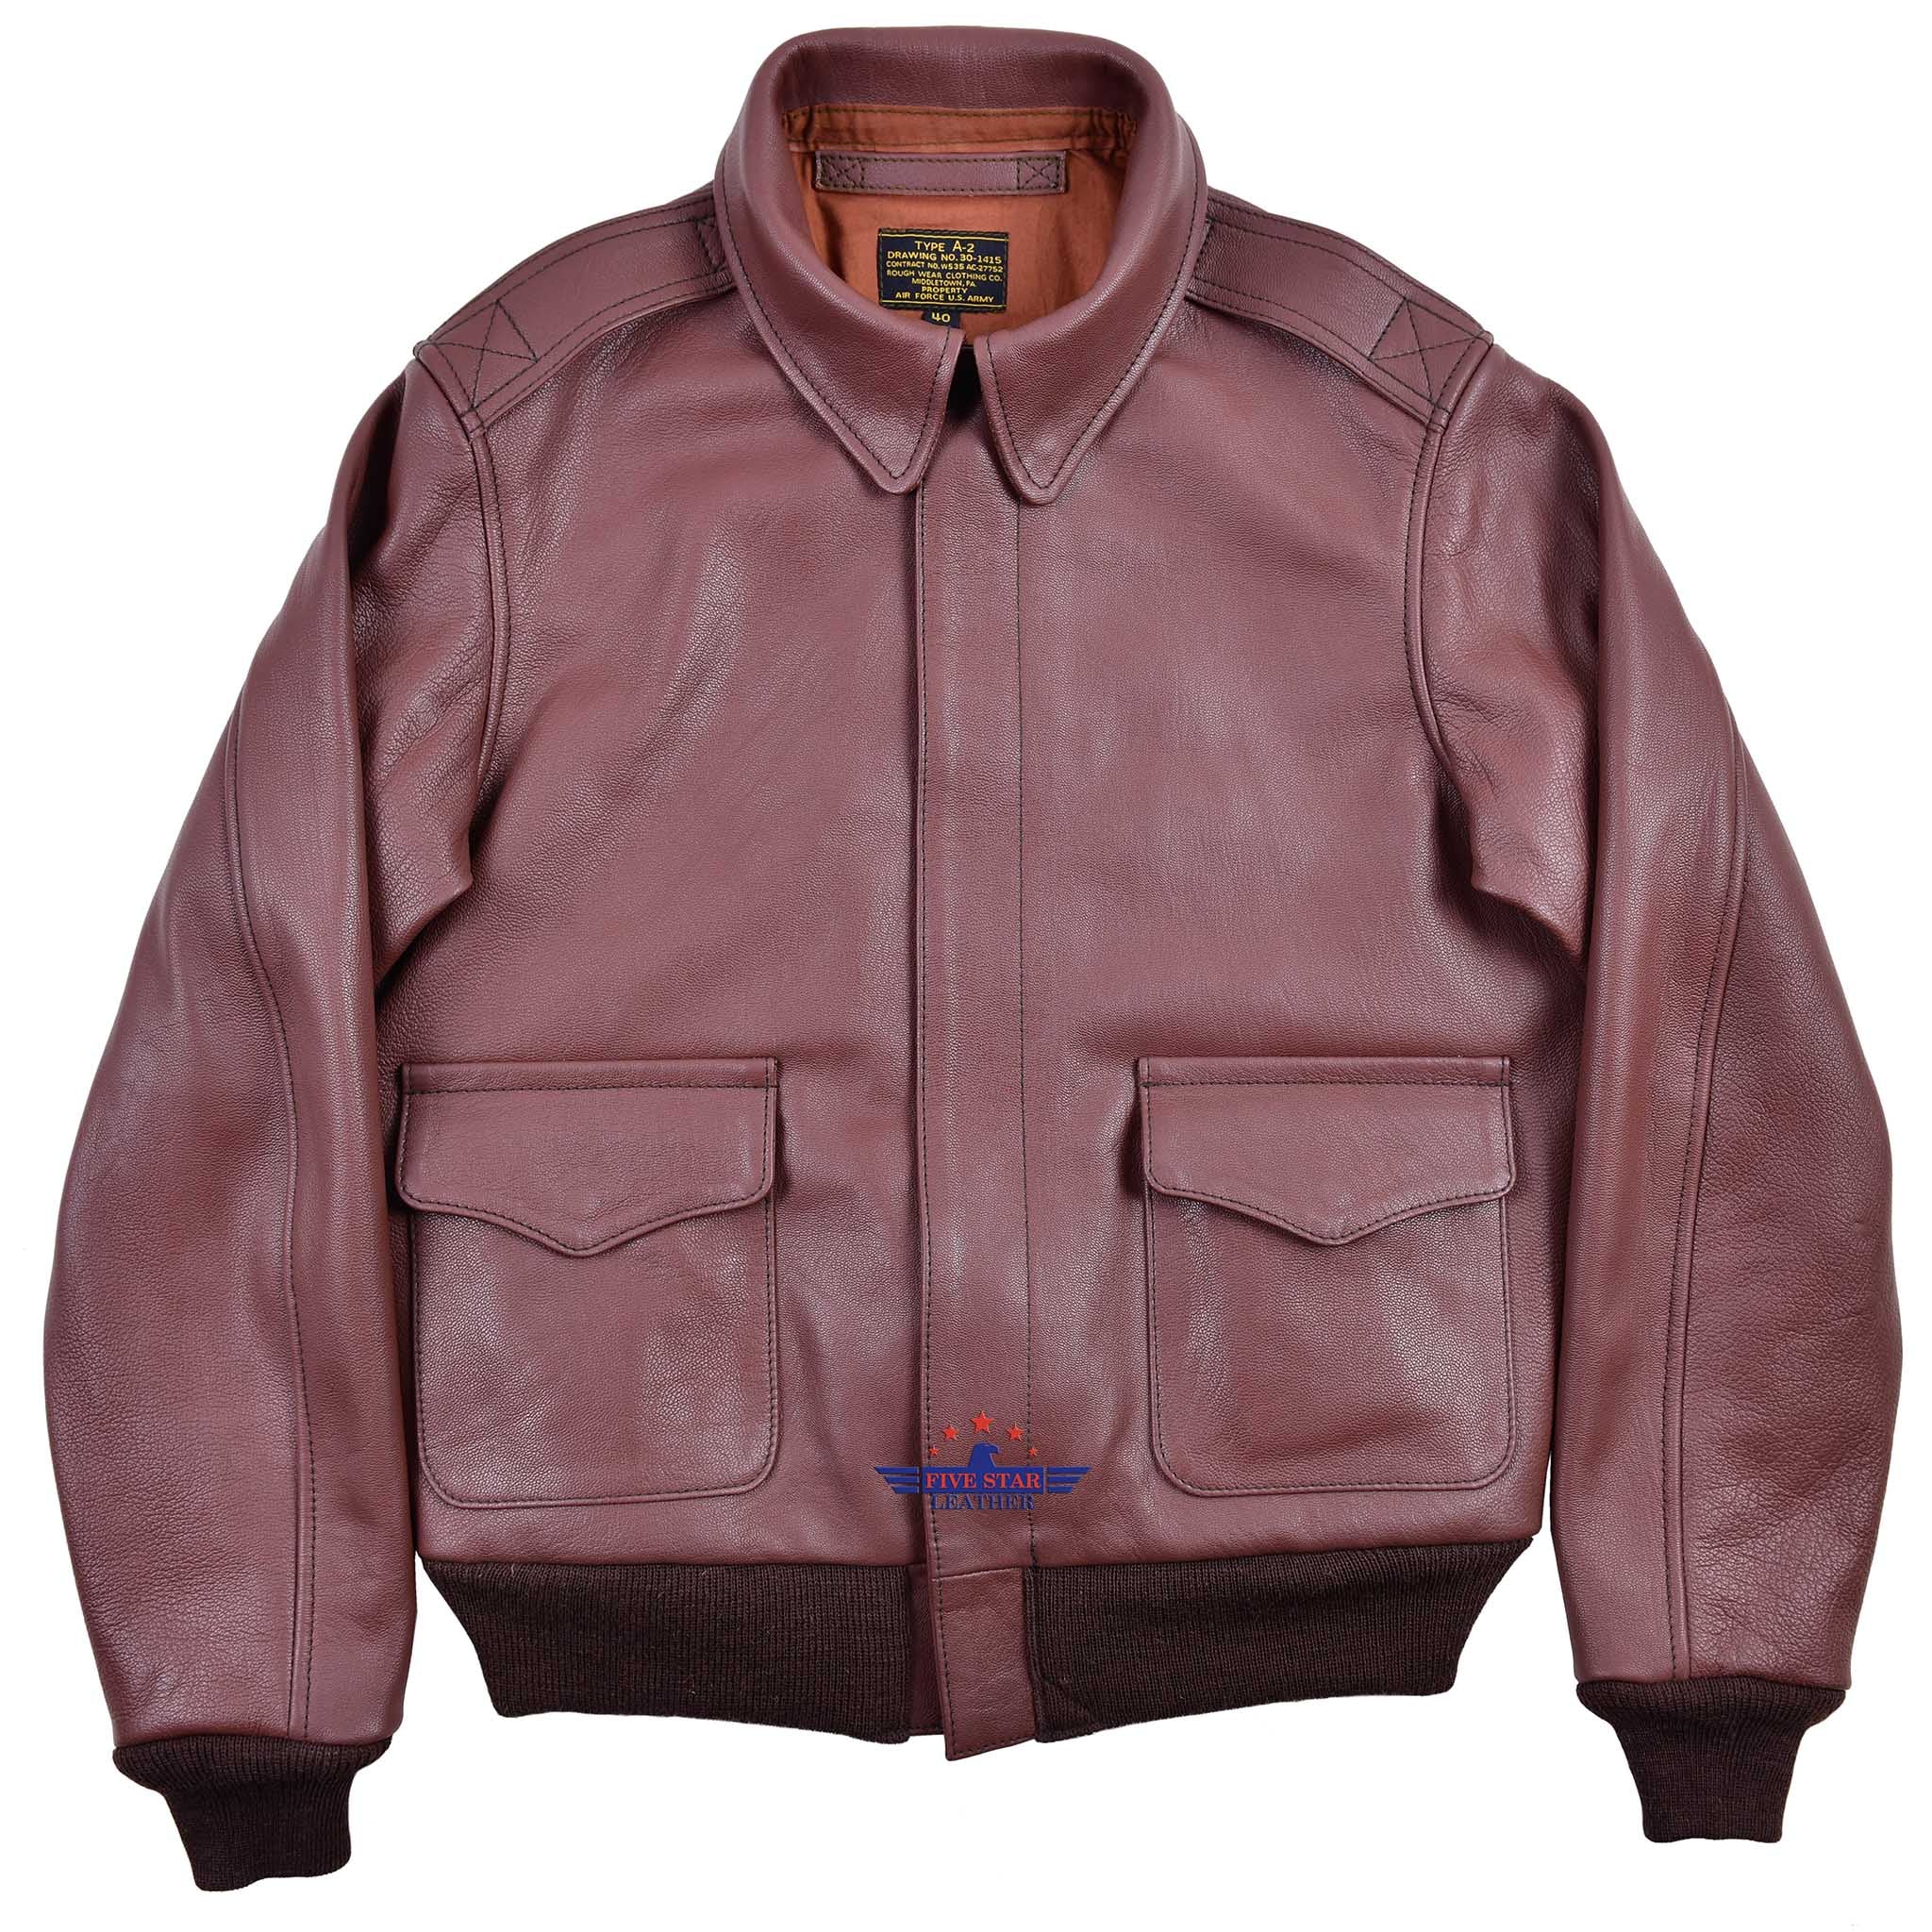 Utility Leather Jacket - Rough Trade Gear - Rough Trade Gear